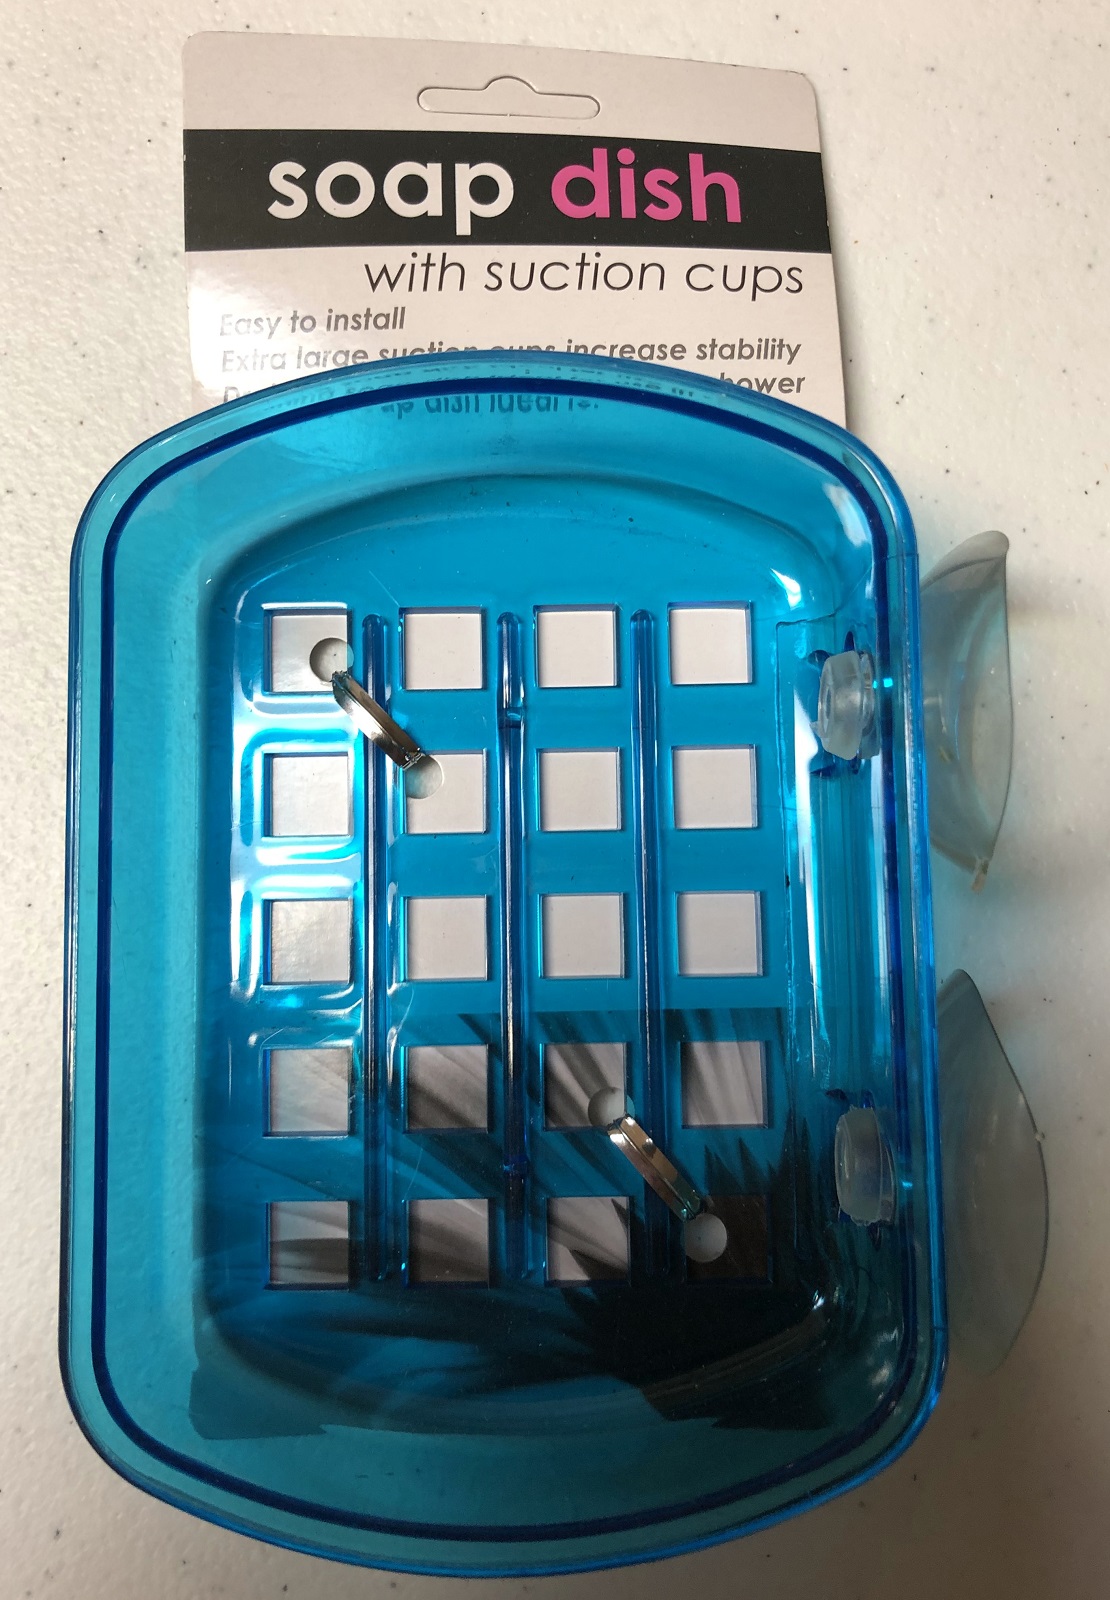 Soapdish Holder with Suction Cups